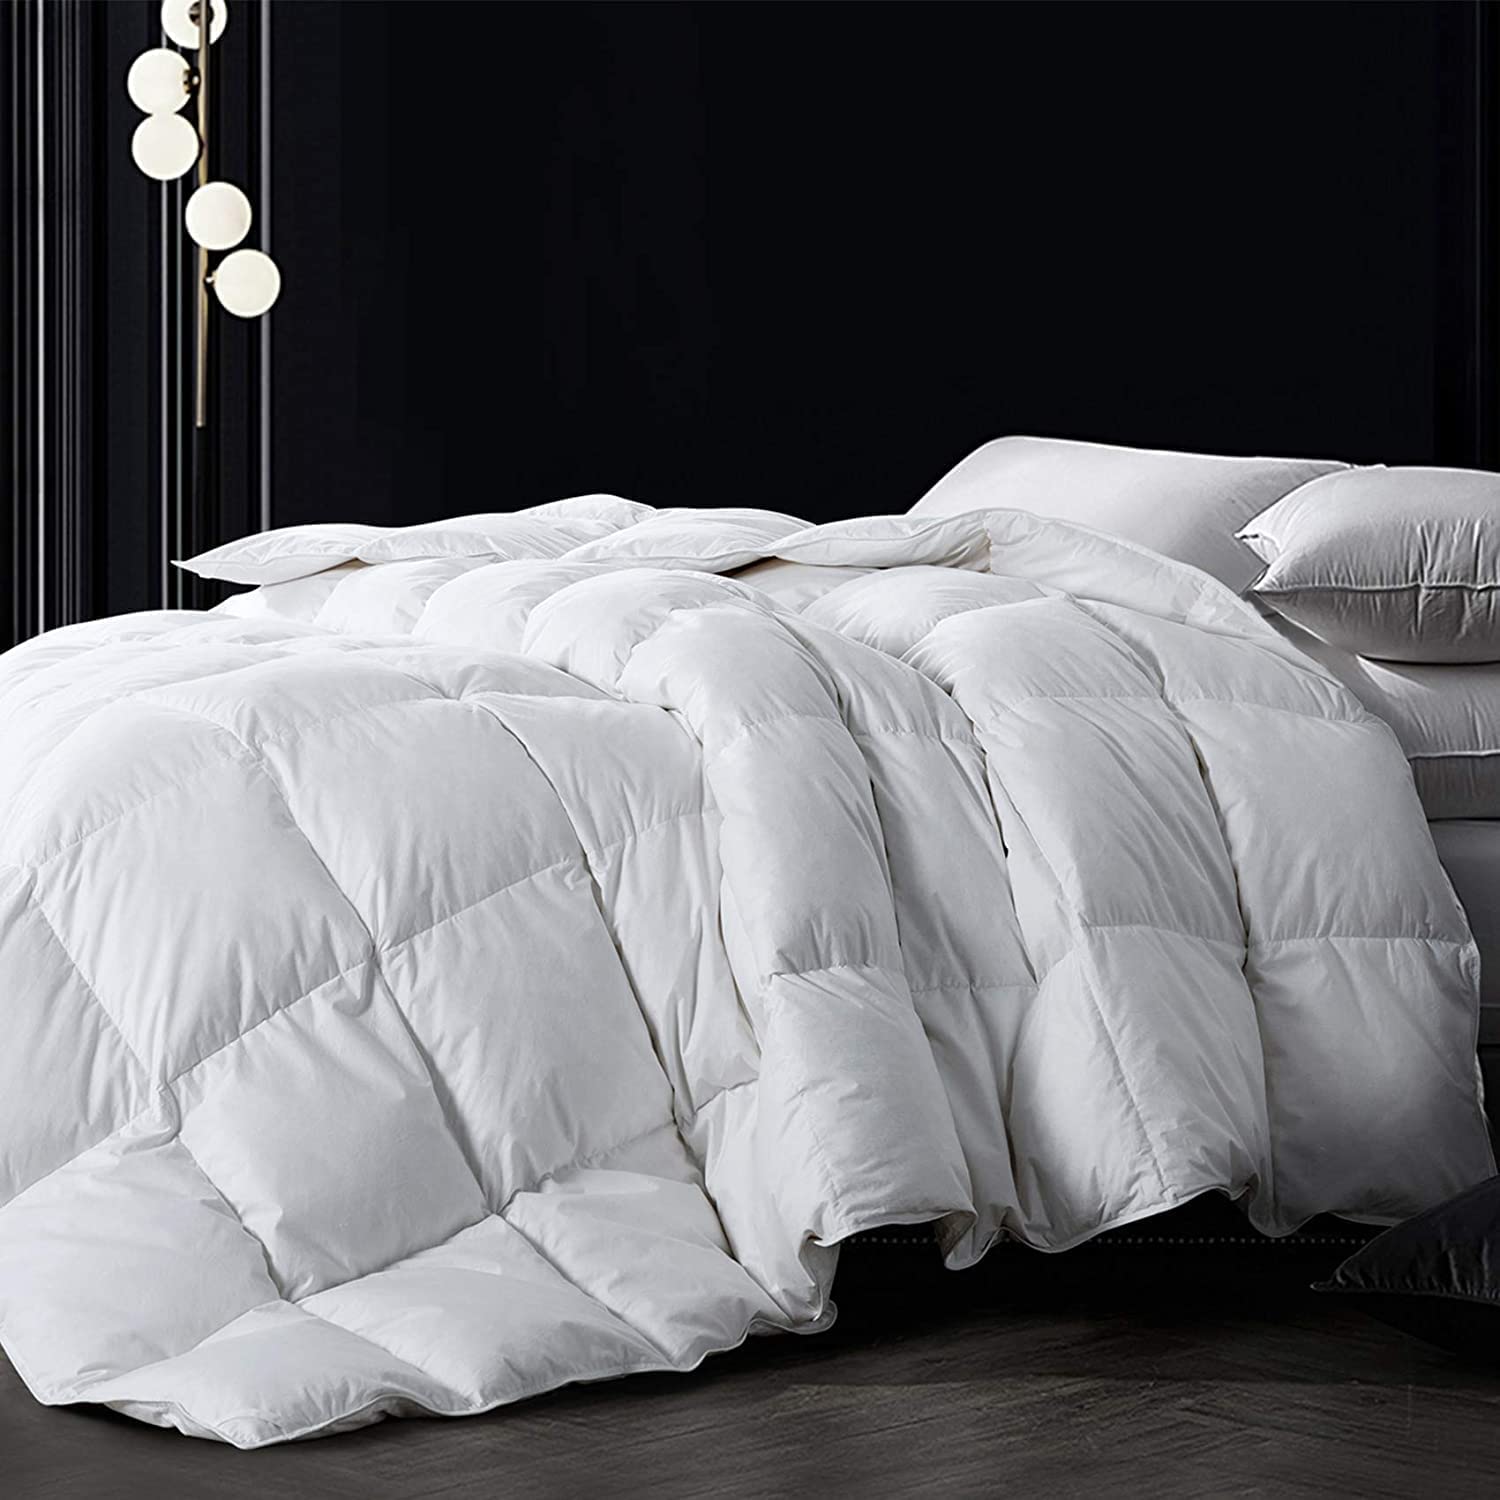 Book Cover DECROOM Clearance Sale,White Comforter Queen Full Size, Down Alternative Quilted Duvet Insert Queen,3M Moisture-wicking Treament,Light Weight Soft and Hypoallergenic for All Season Comforter